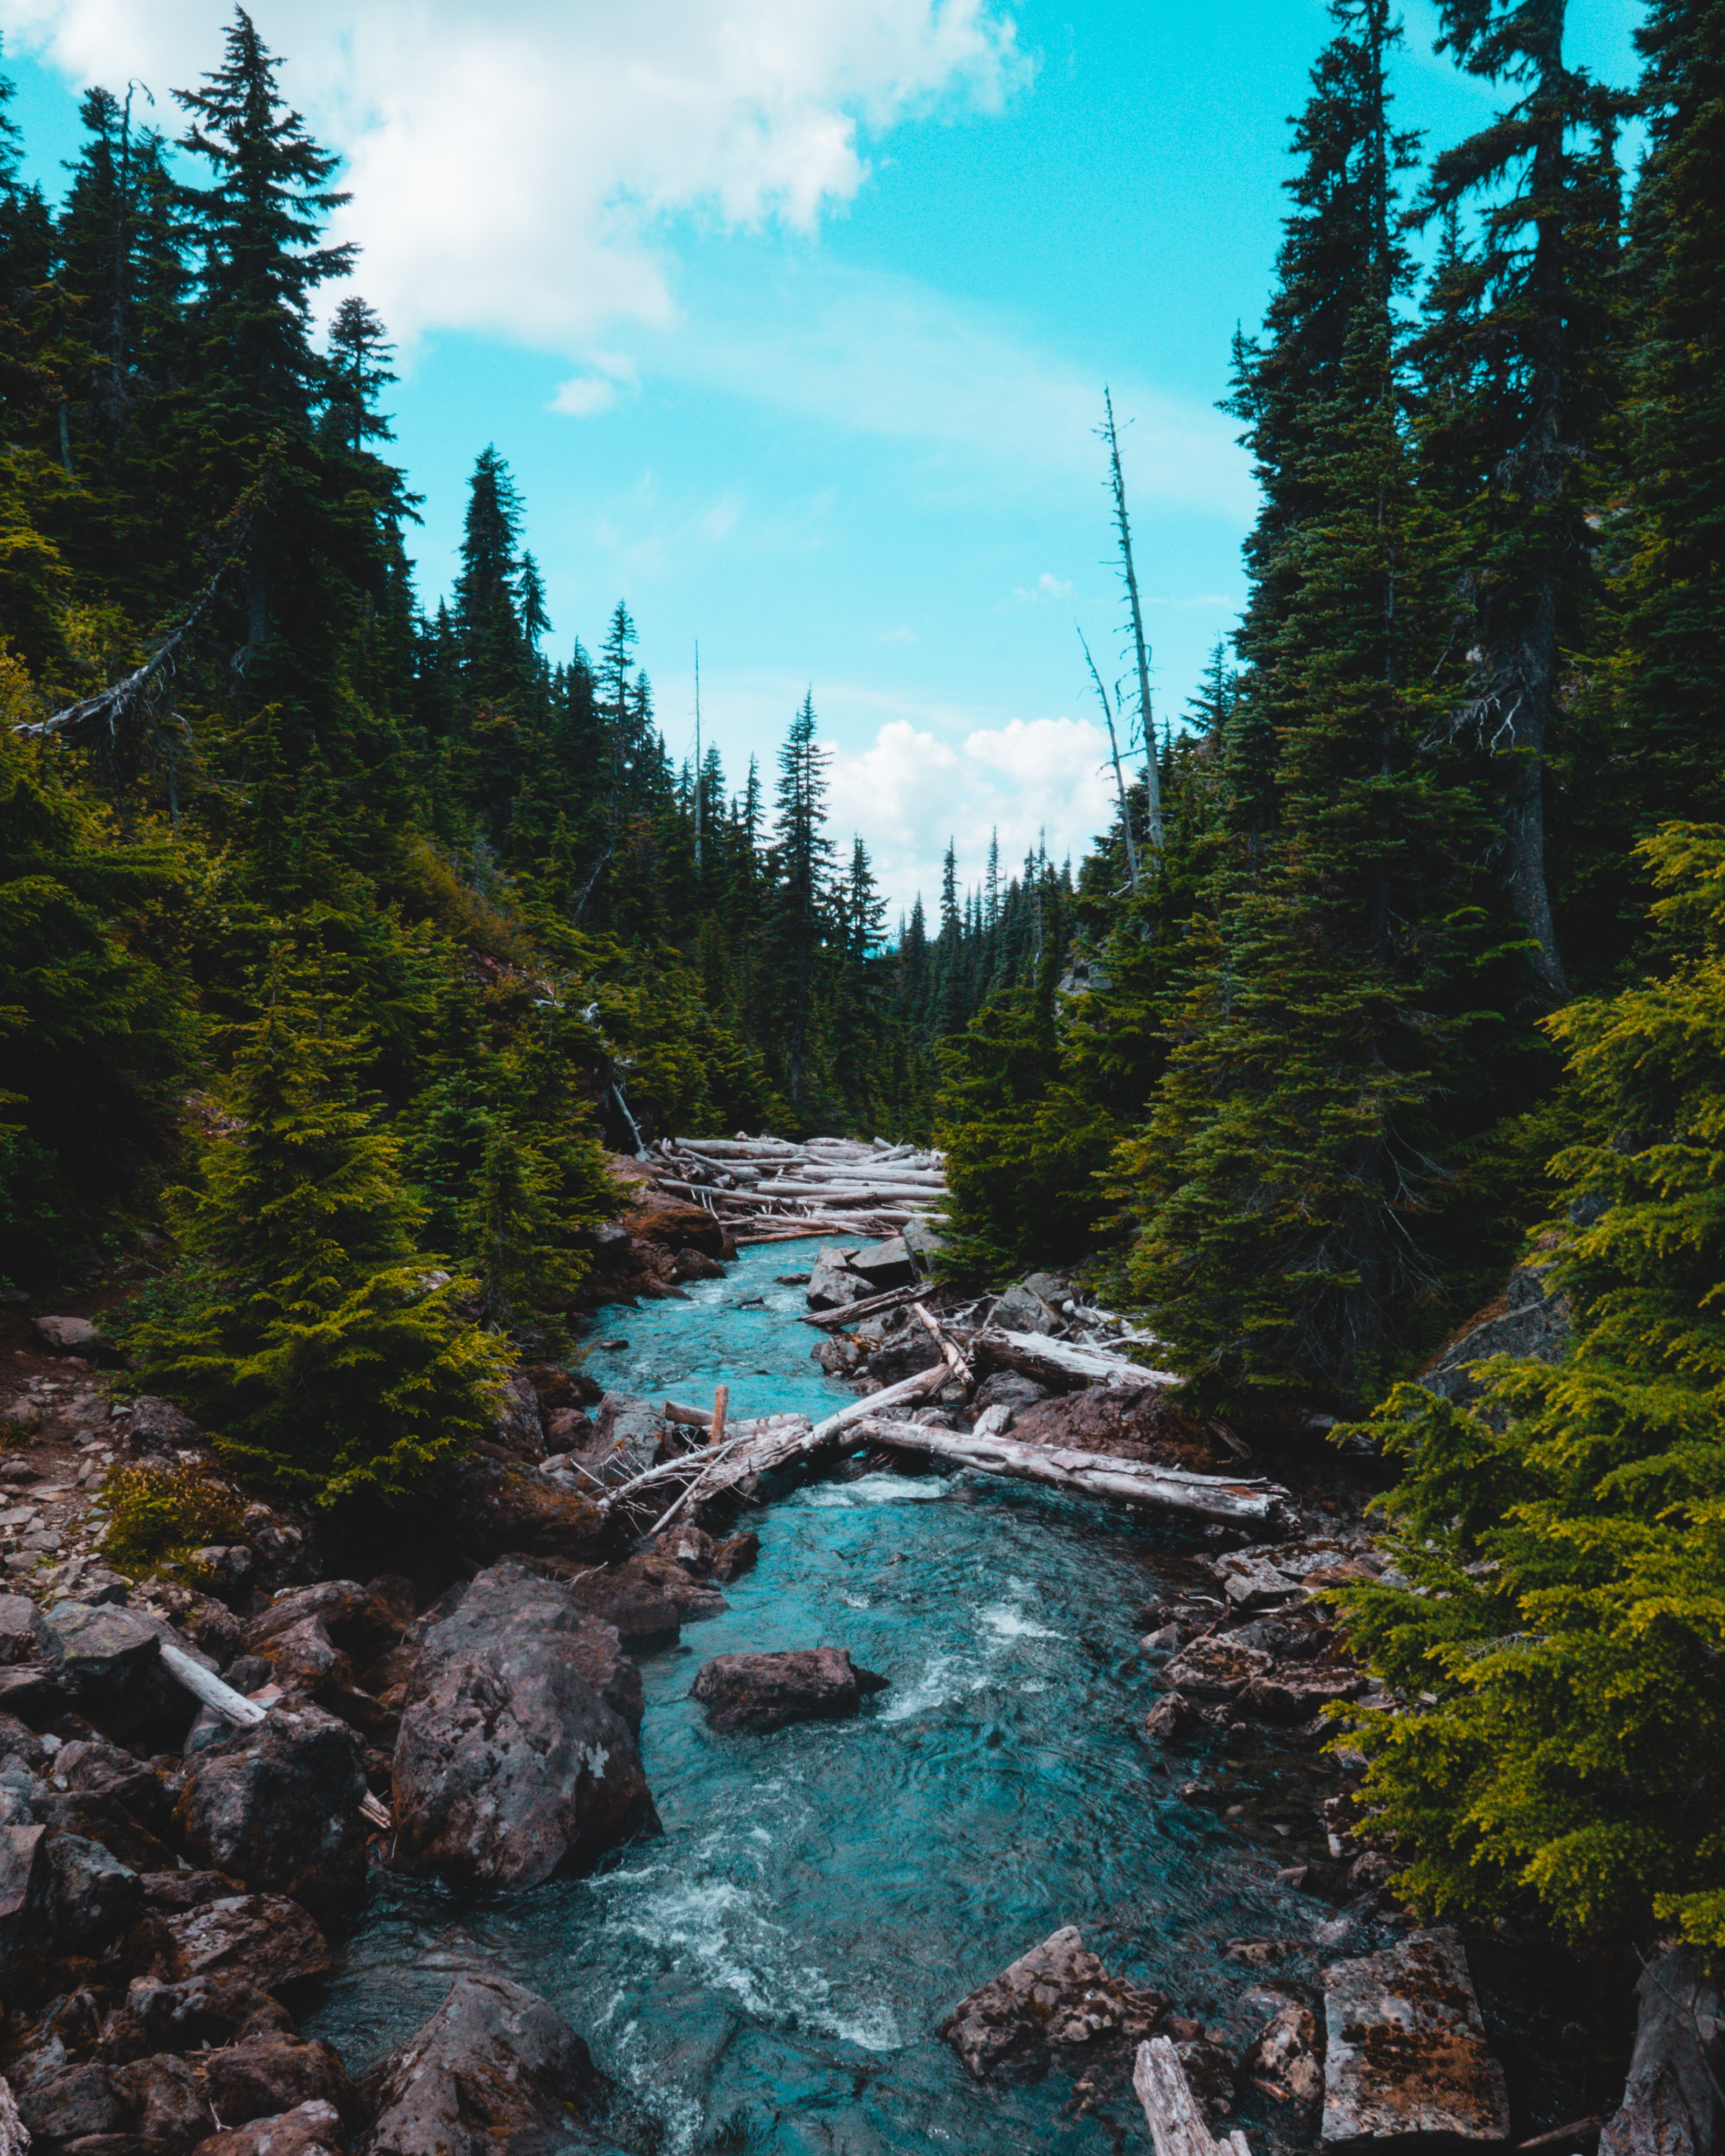 flow, fir, forest, stones, stream, rivers, spruce, nature